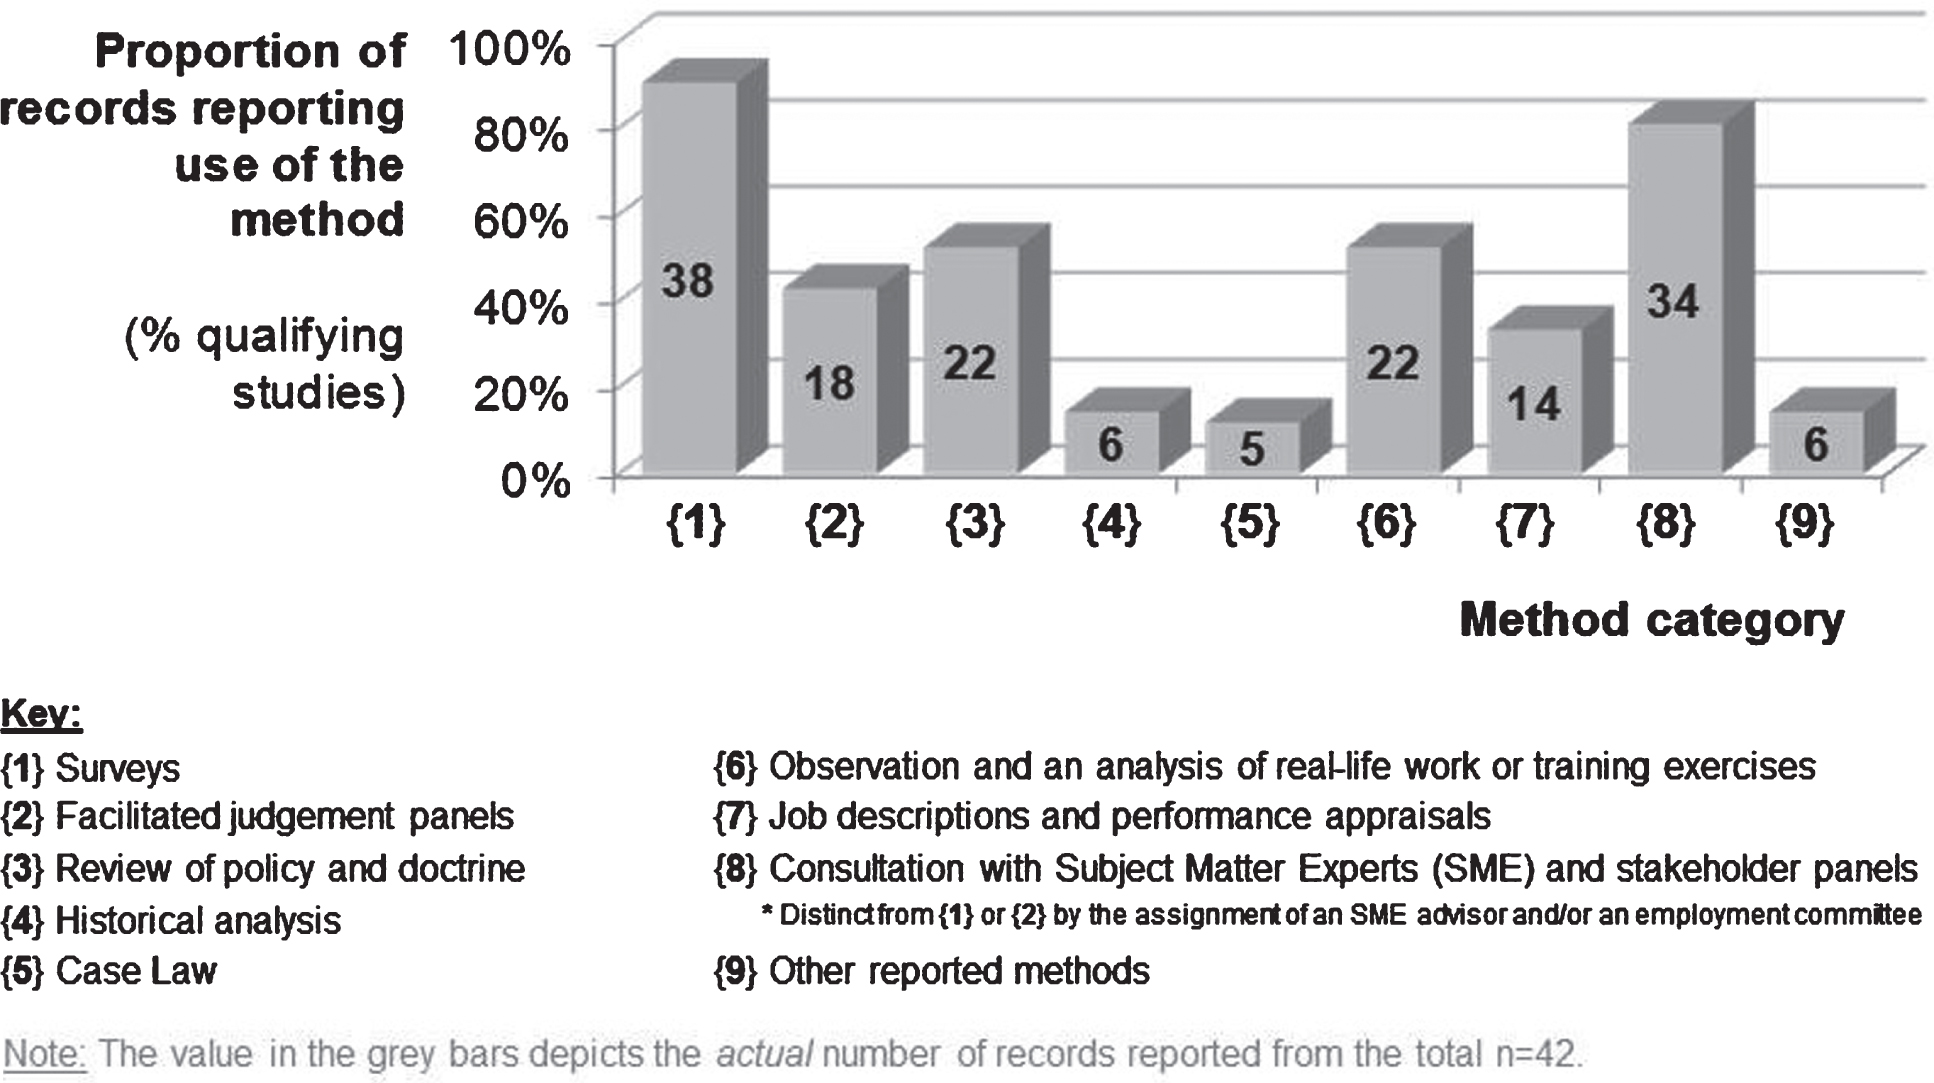 Number (and proportion) of the 42 studies reporting use of multiple methods to identify critical job tasks in the emergency services.